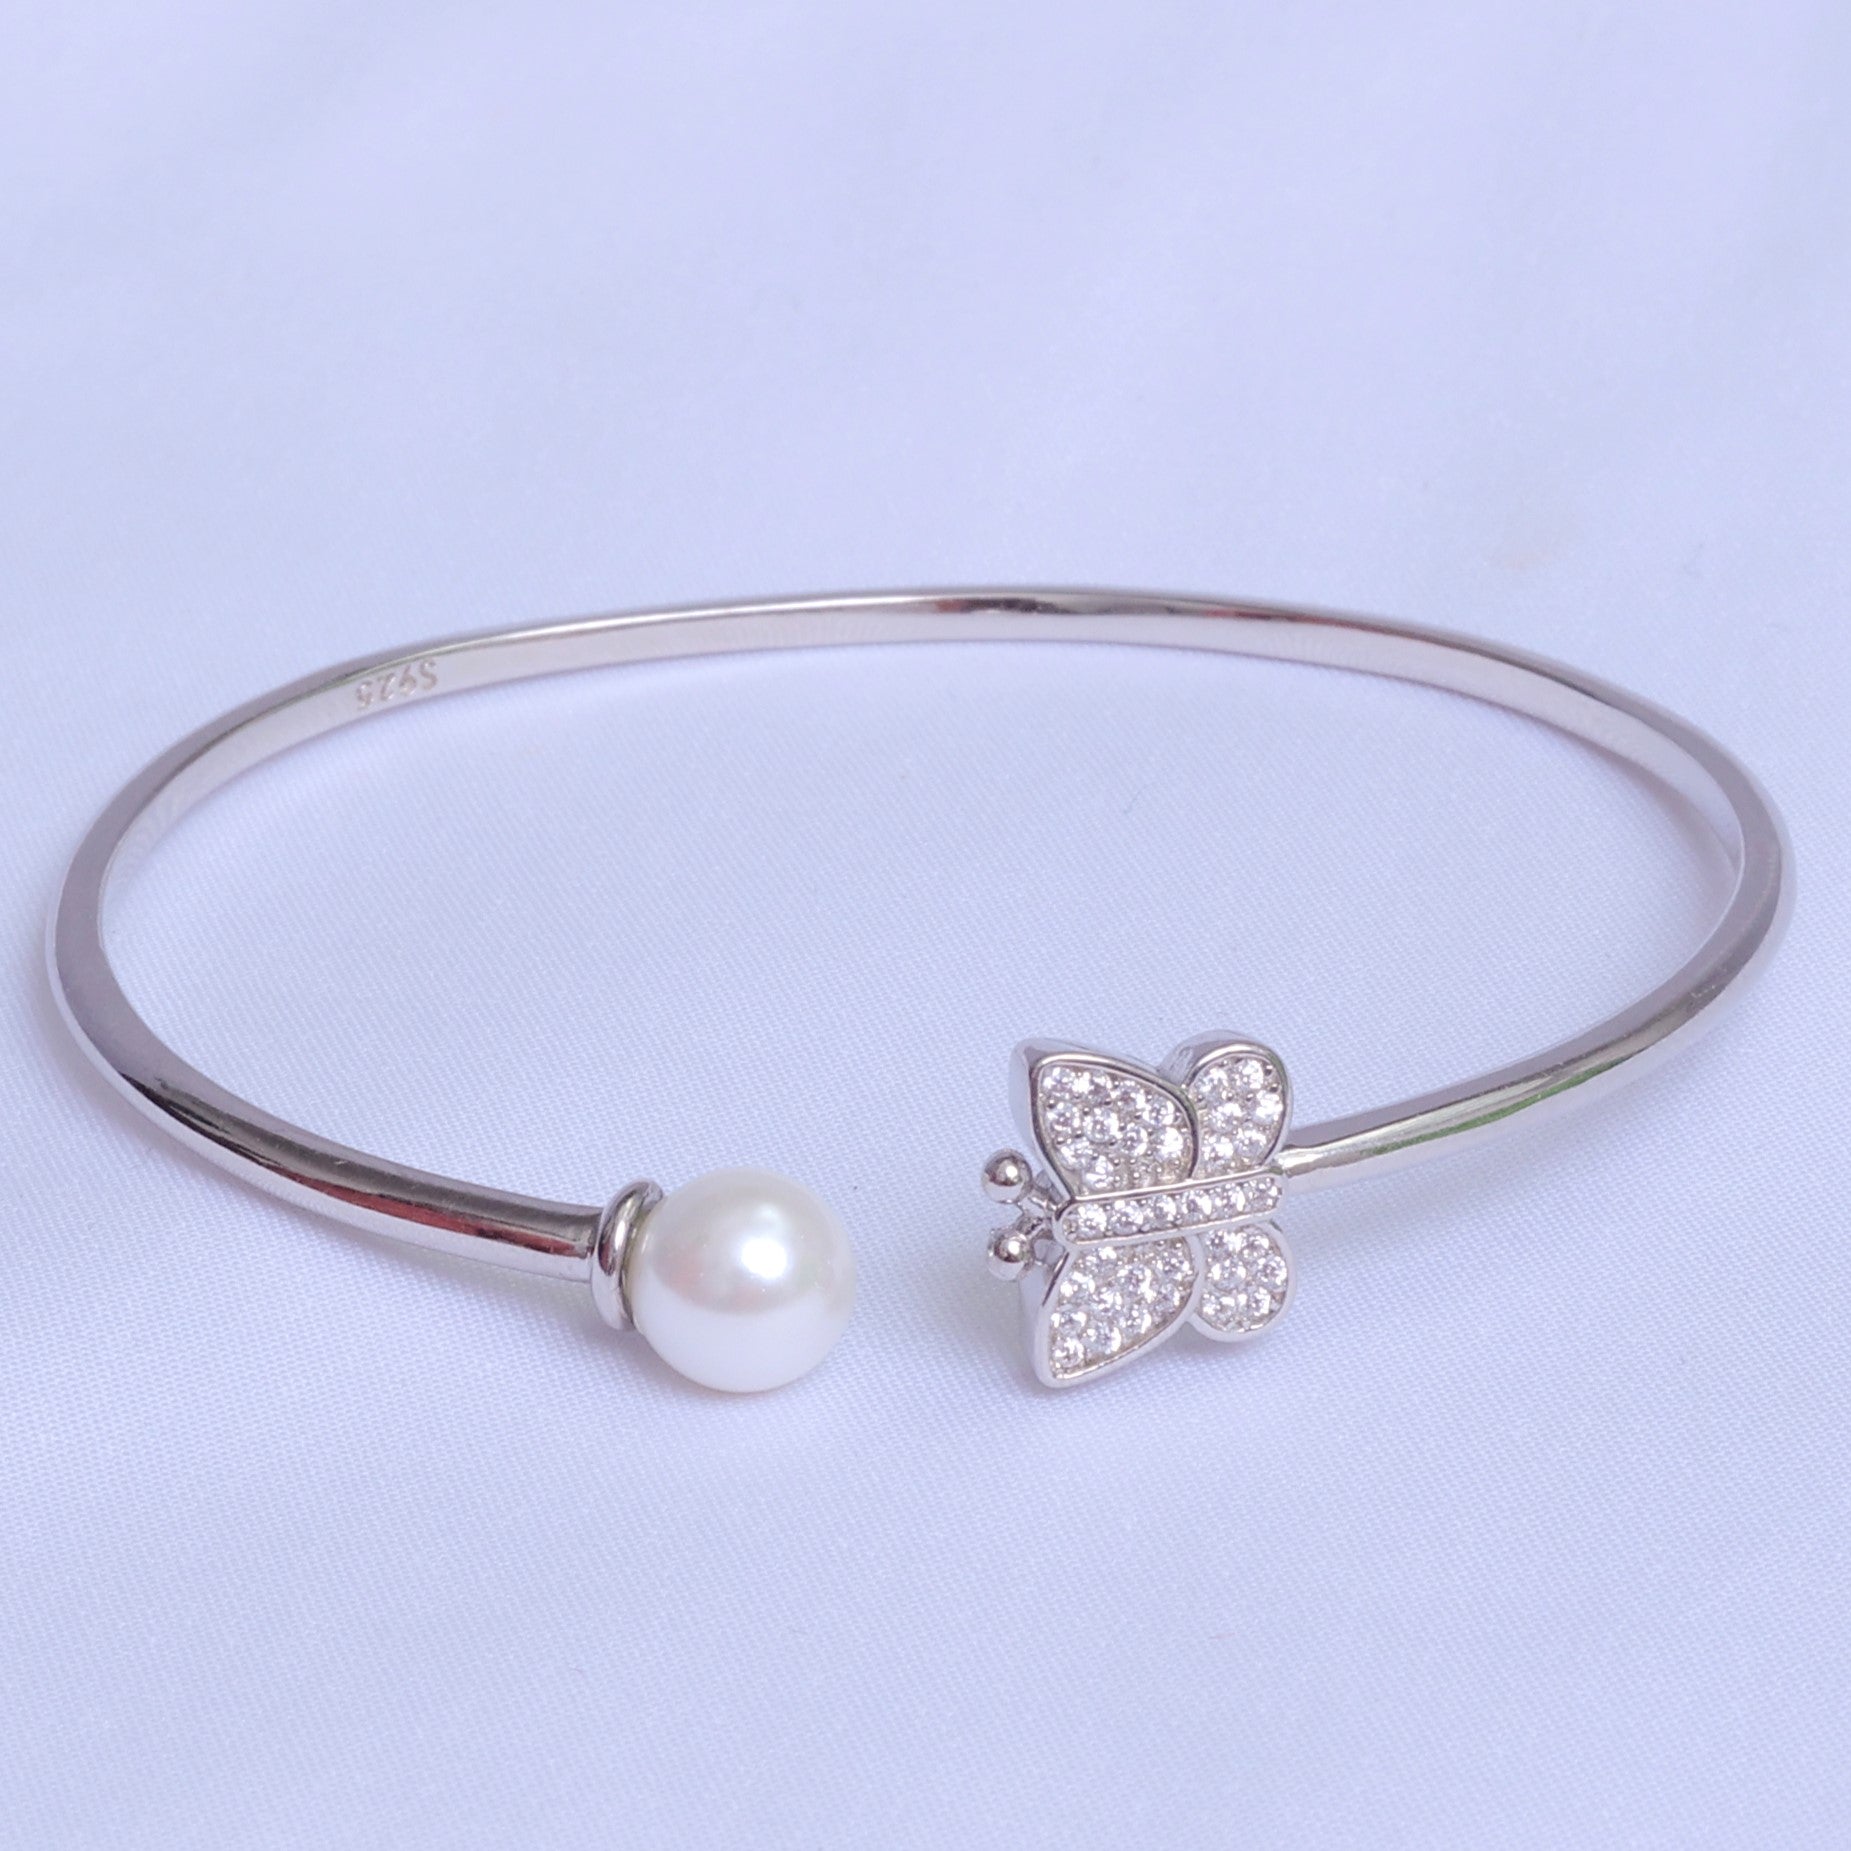 Silver Bracelet With White Freshwater Pearl